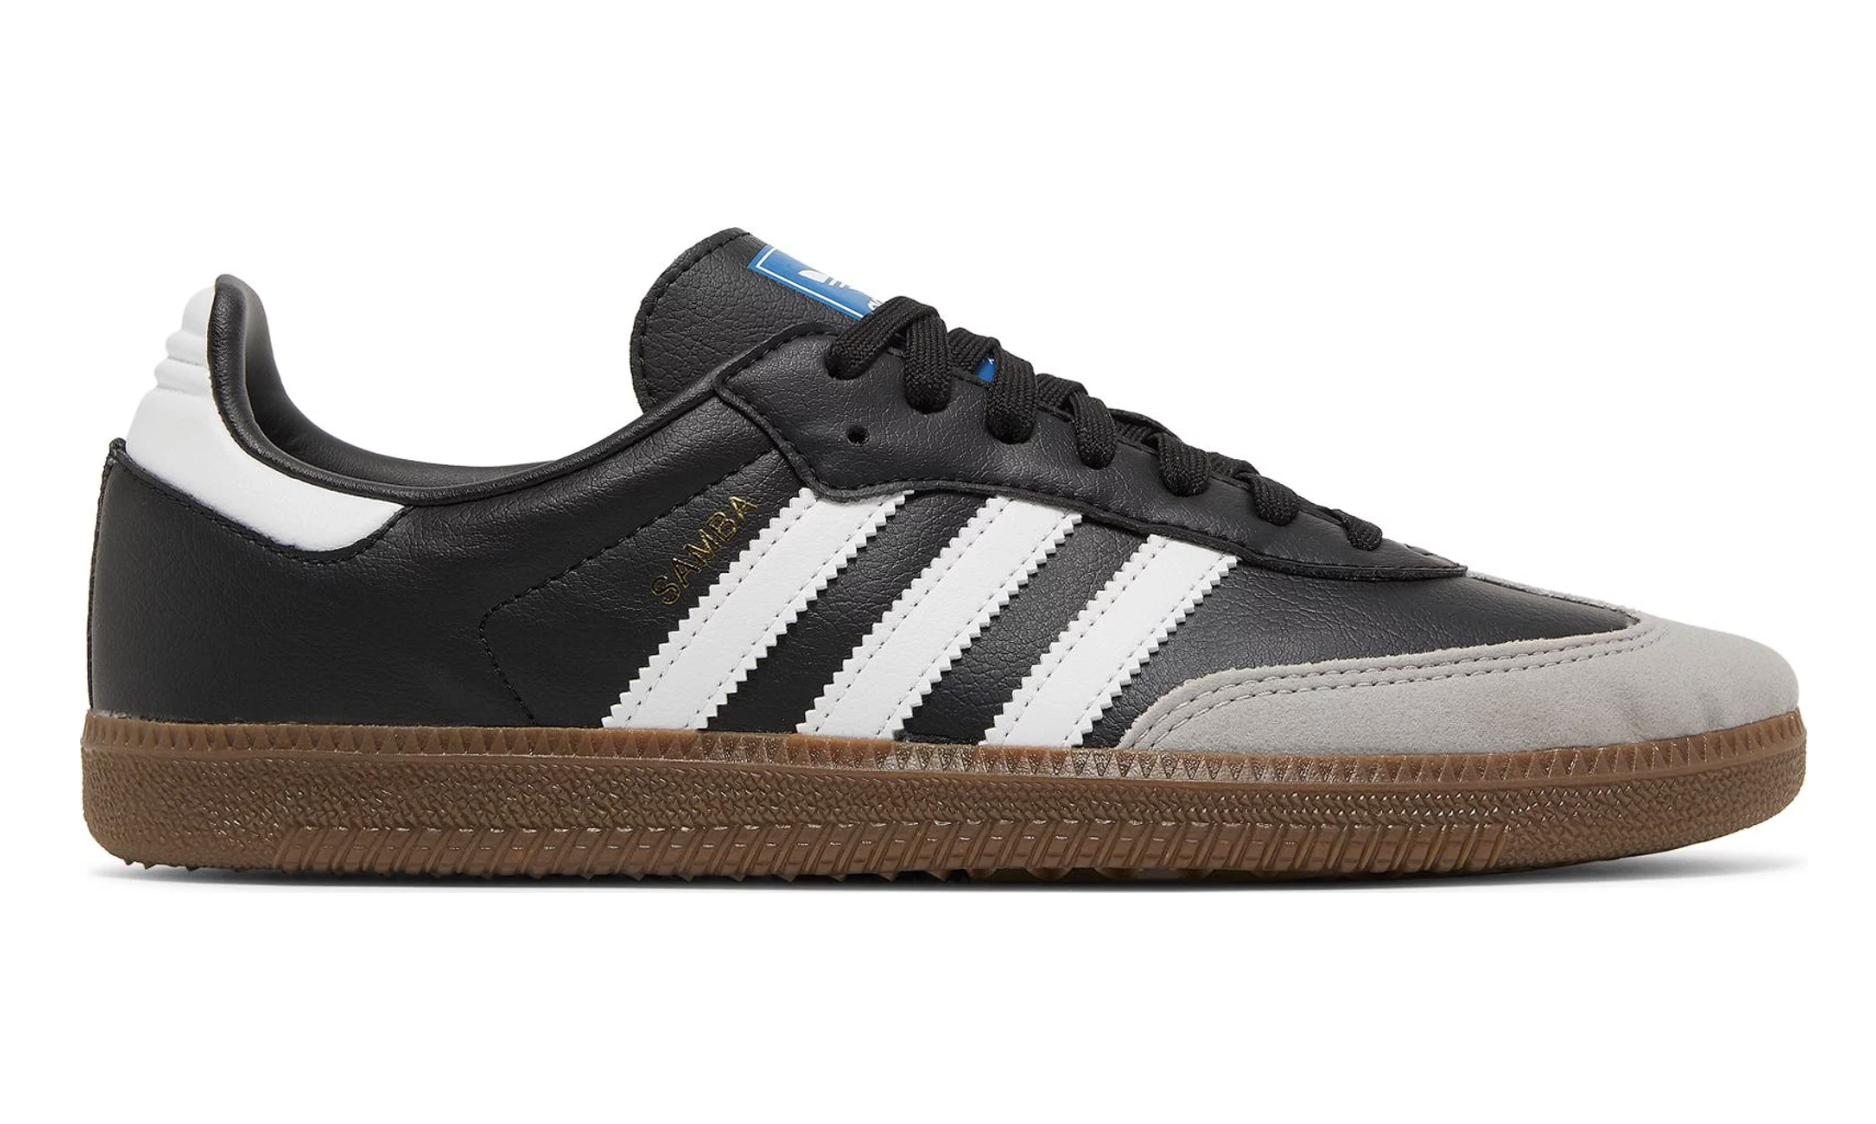 From Adidas Sambas to Asics Japan S: 10 trending sneakers in India right now